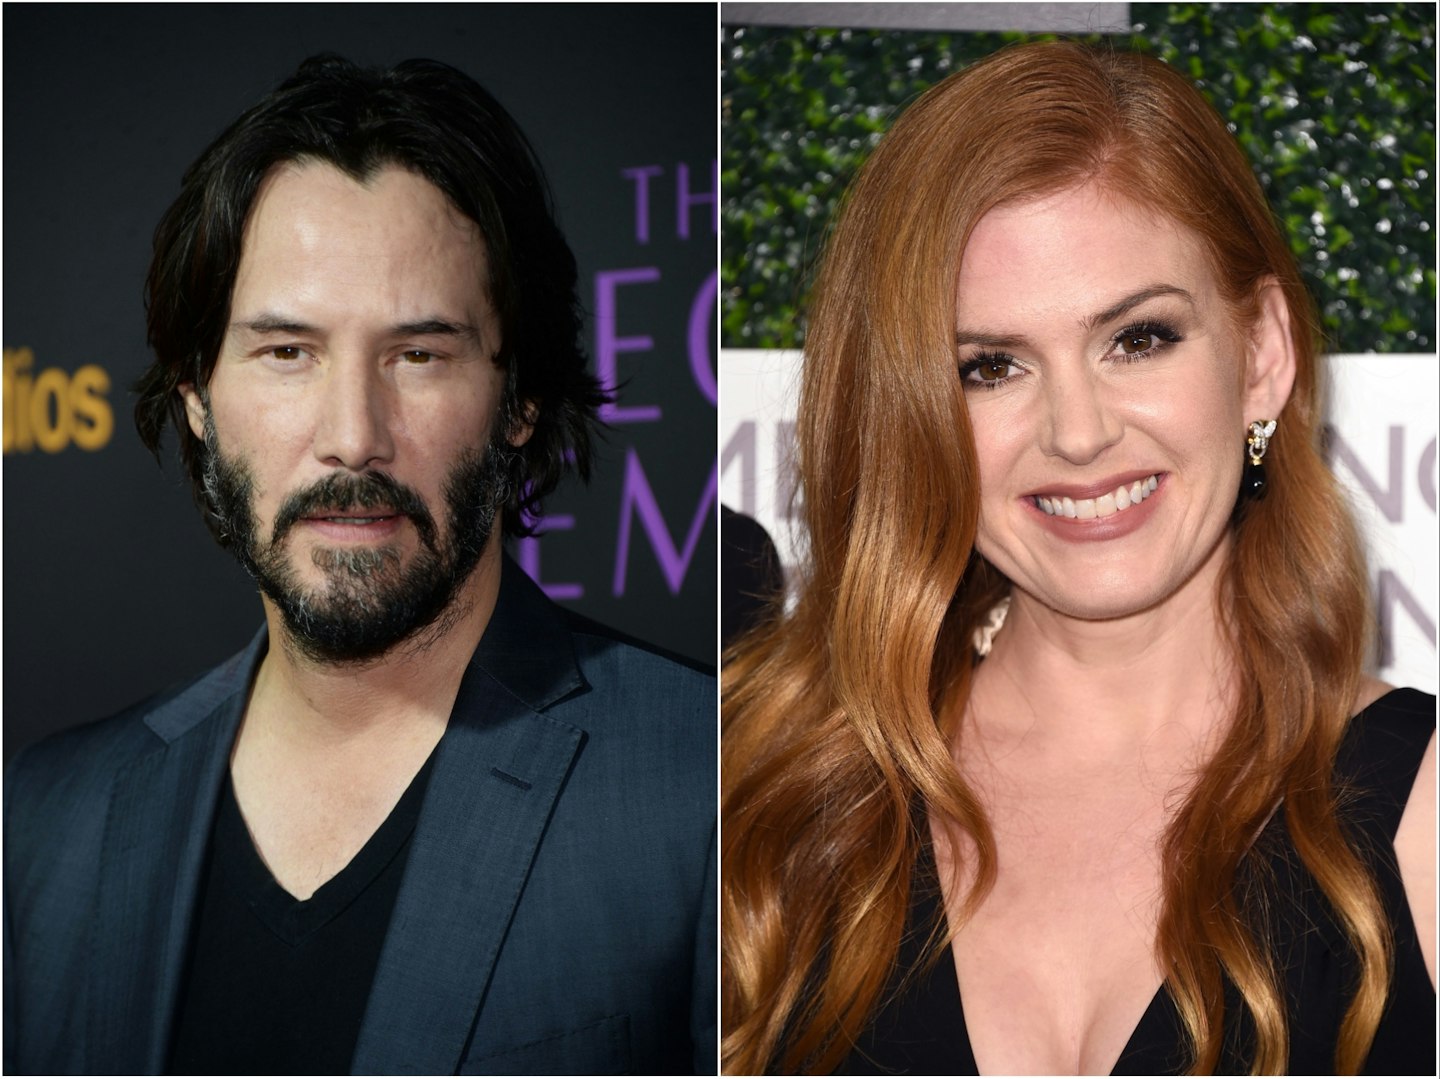 Keanu Reeves and Isla Fisher